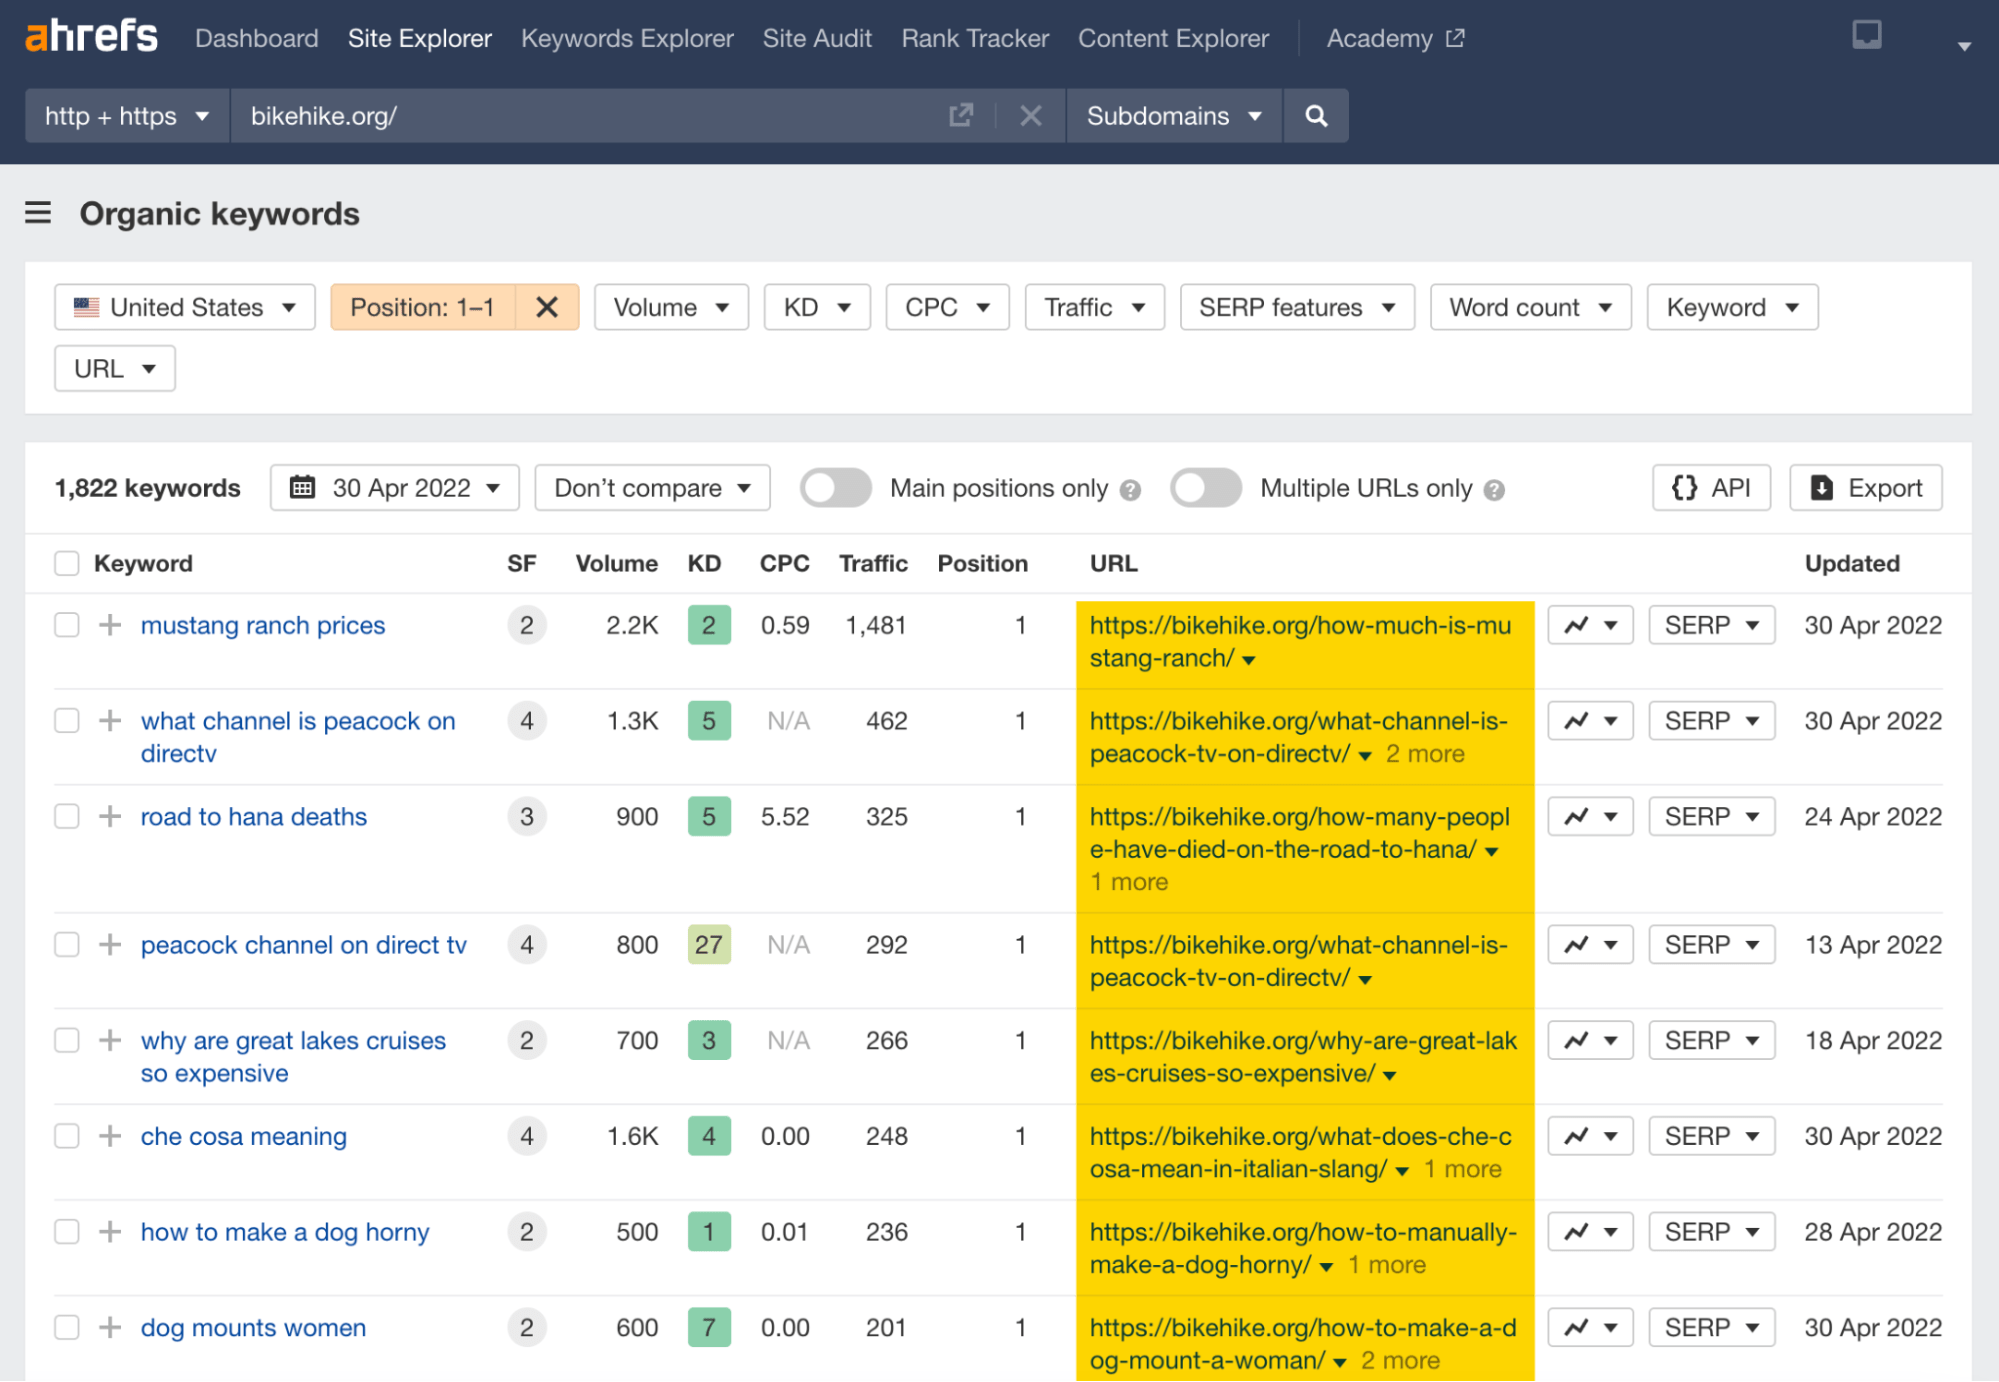 Organic keywords report filtered for domains in position #1, via Ahrefs' Site Explorer
